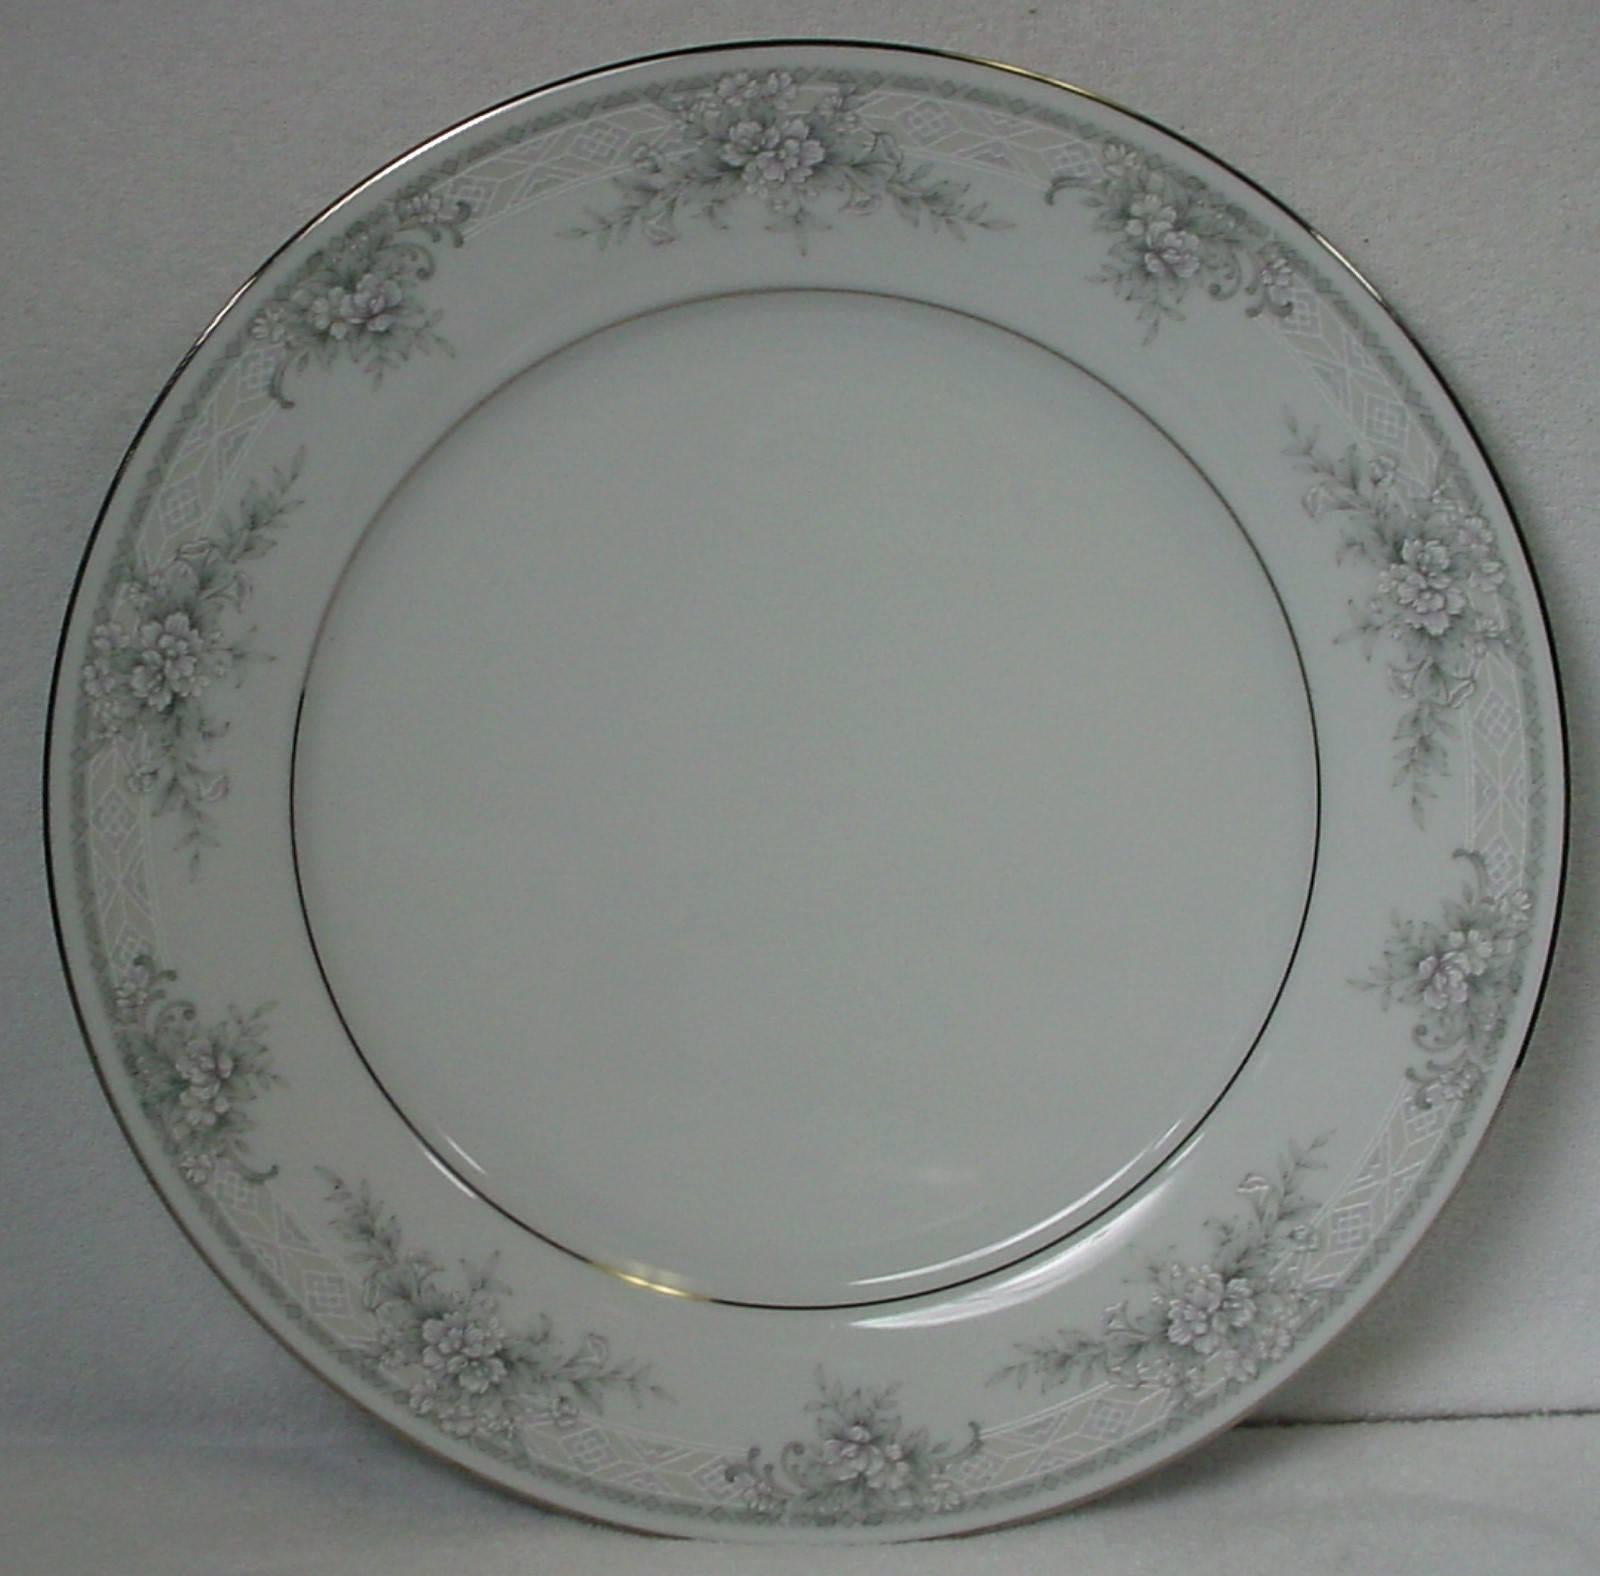 CHINA FINDERS 

China, Crystal, Flatware and Collectible Matching Service is offering ONE (1) 

NORITAKE china SWEET LEILNI 3482 pattern 44-piece Set Service for Eight (8)

in great condition free from chips, cracks, break or stain.

•